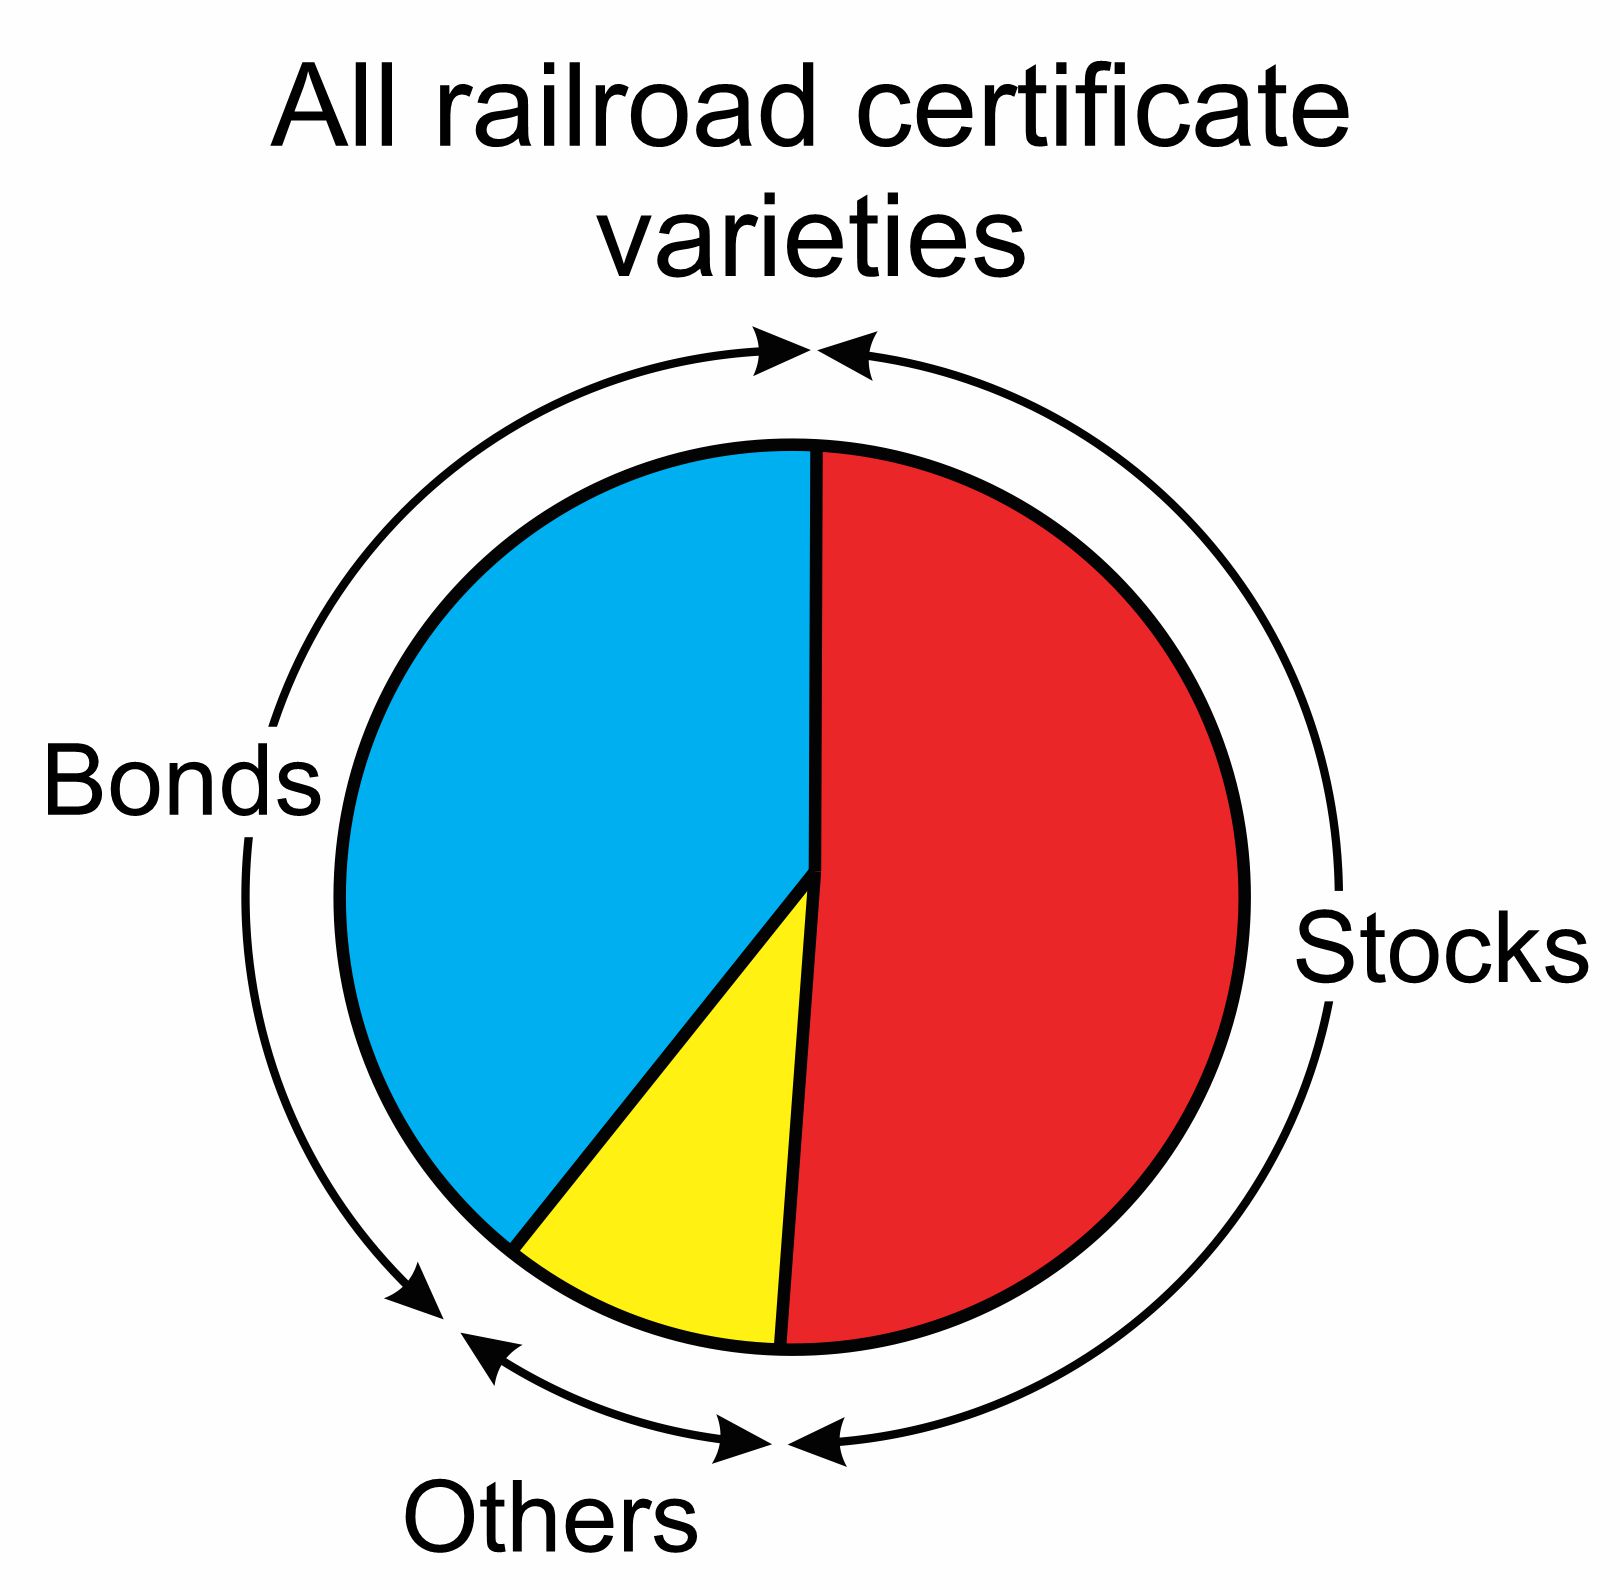 Pie chart of breakdown of all rail-related certificates by type